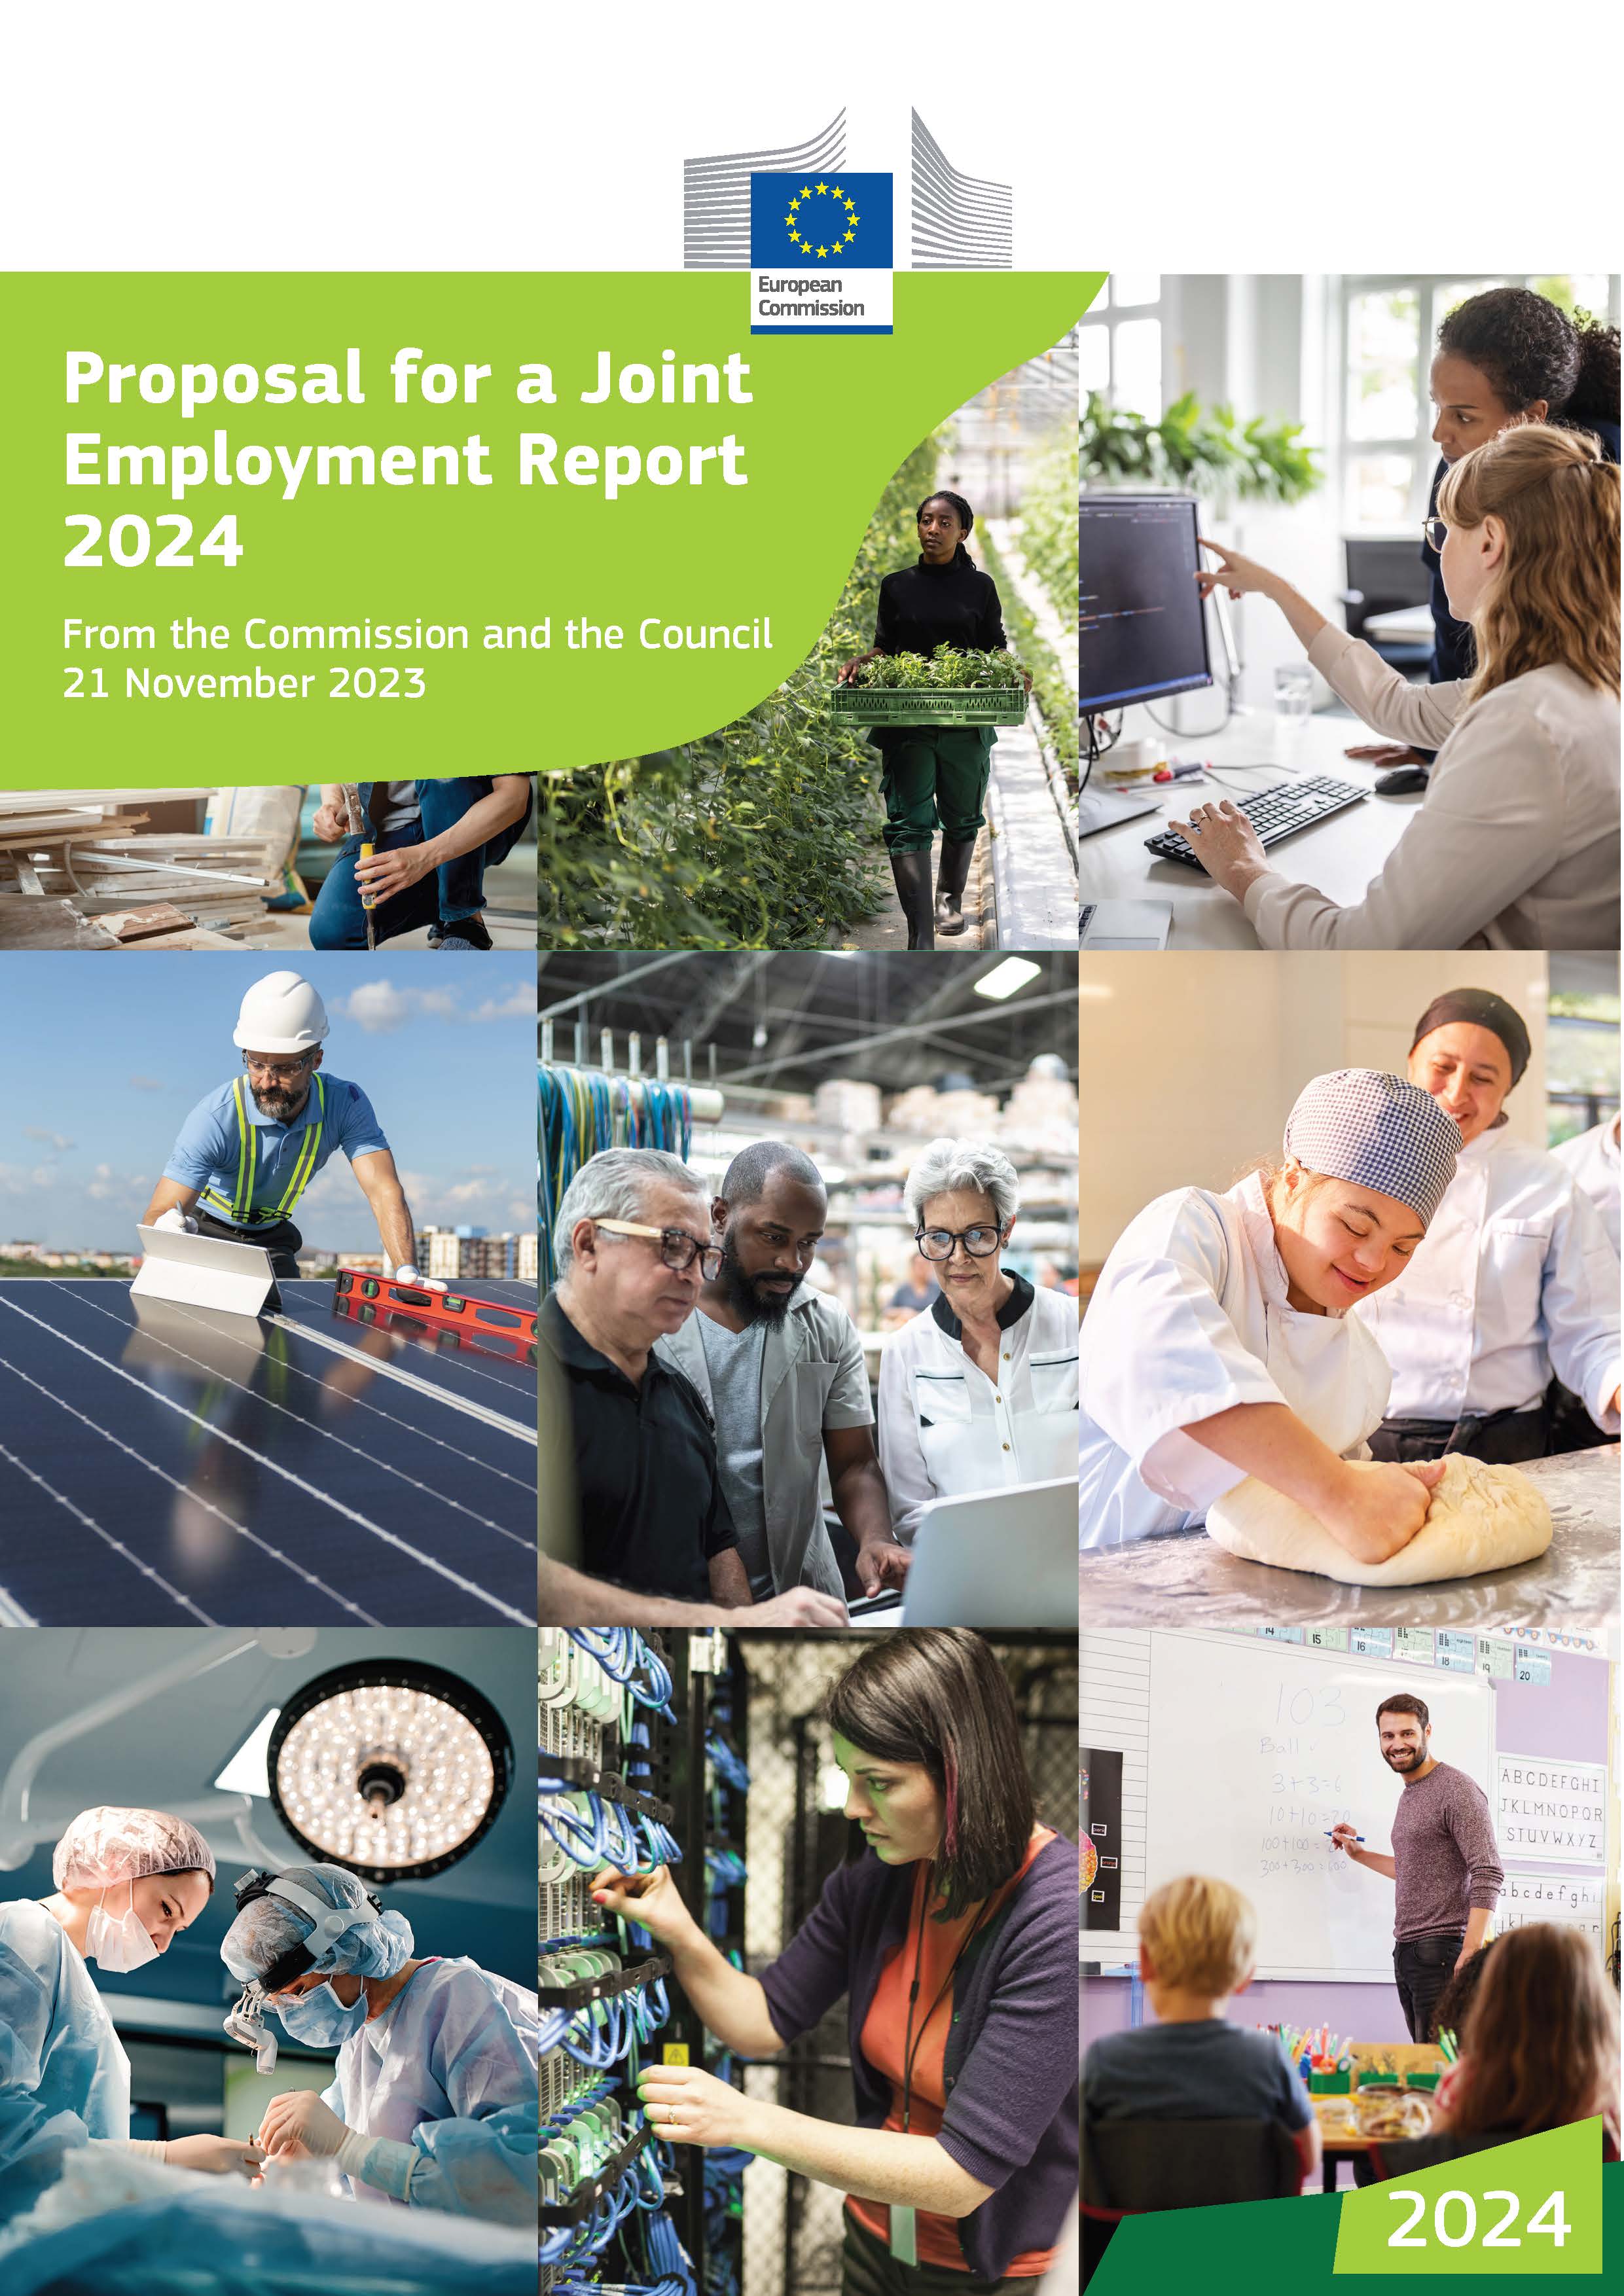 Joint Employment Report 2024 - Commission proposal